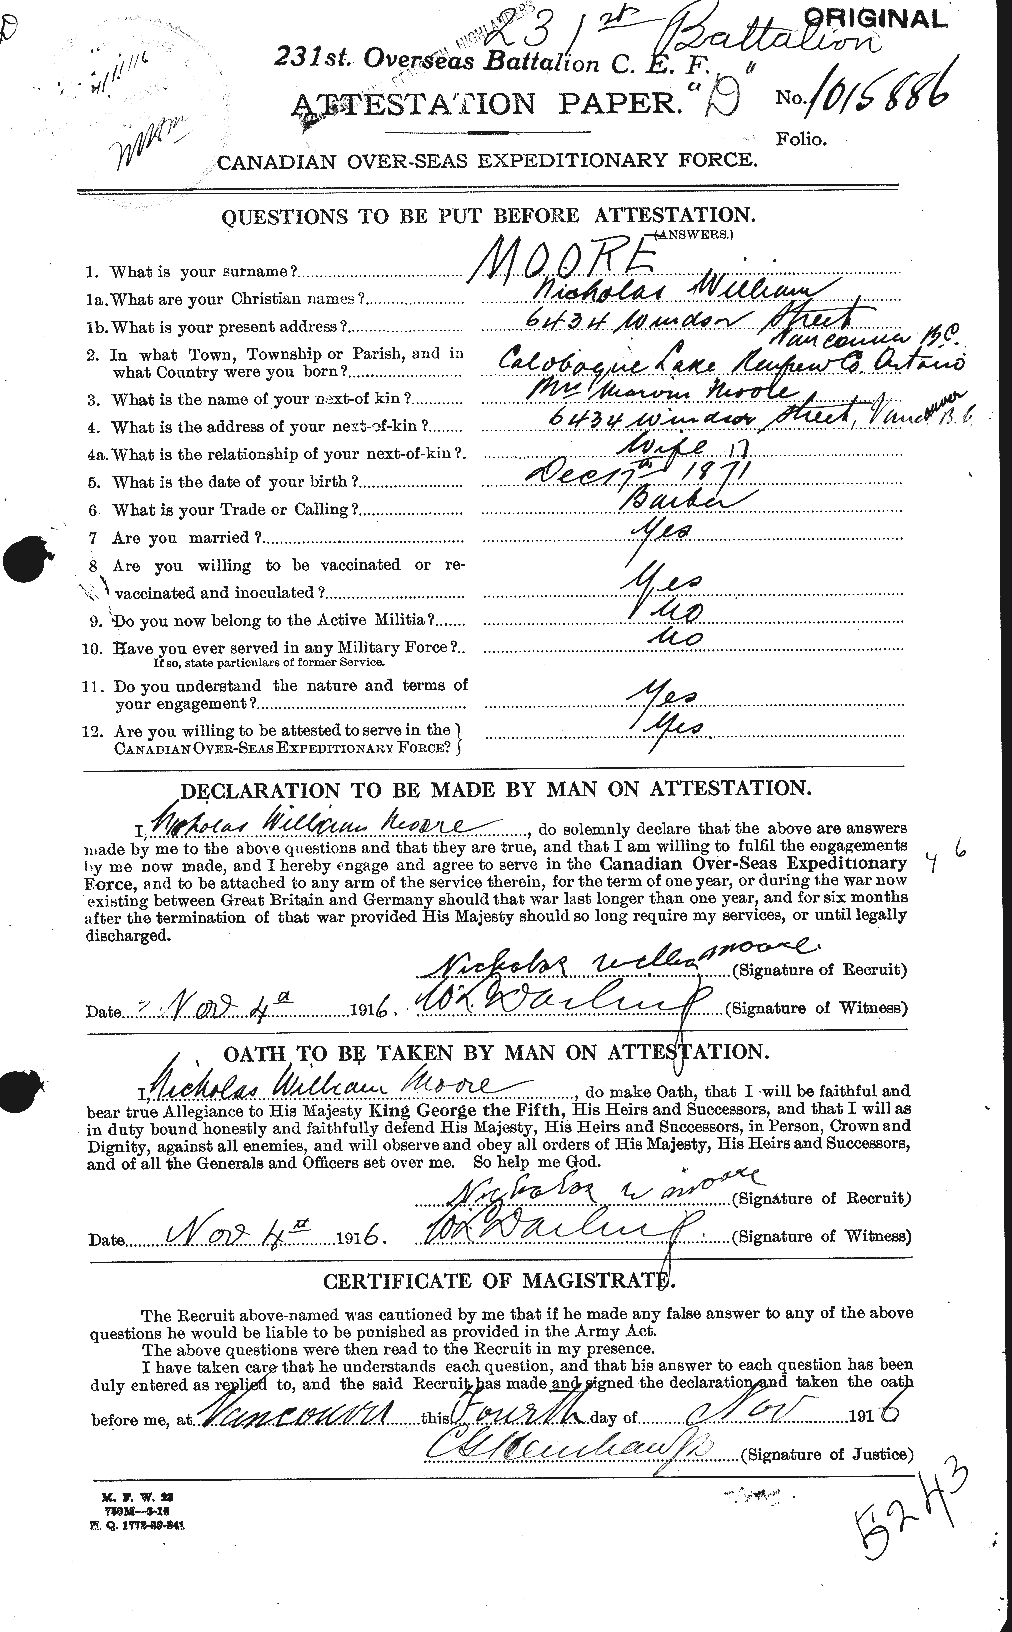 Personnel Records of the First World War - CEF 503455a